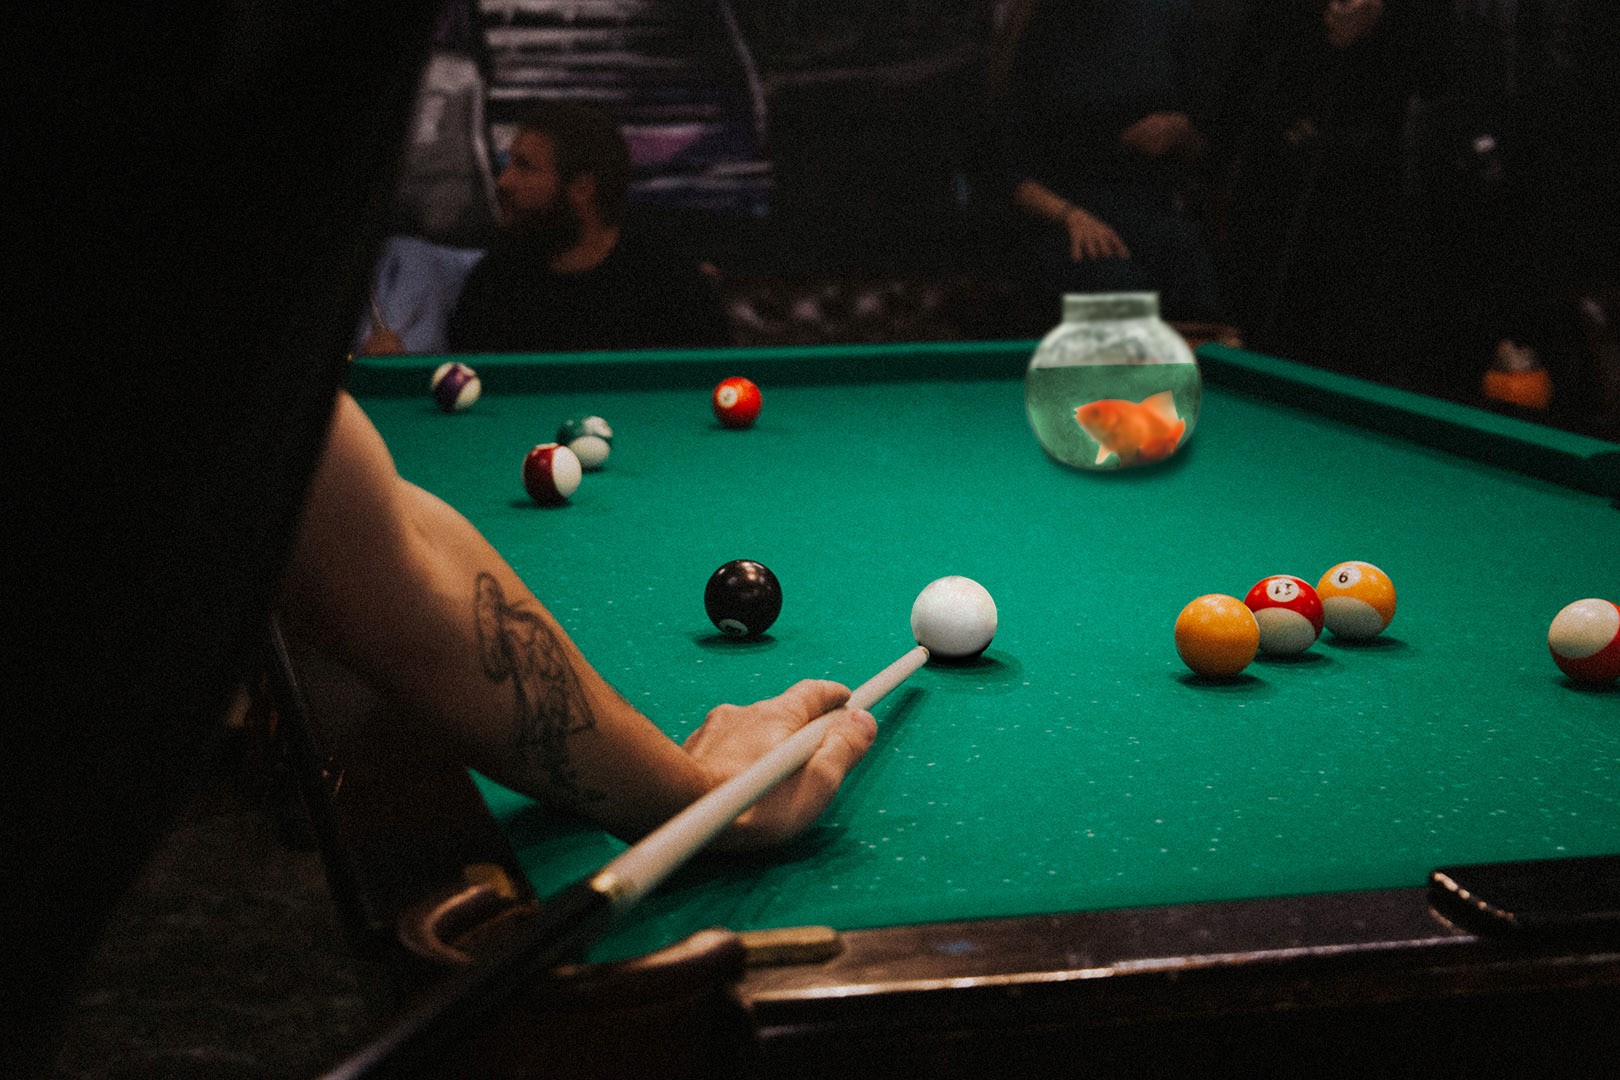 Picture of a pool cue aimed at a fish bowl in an example of one of the weird insurance claims